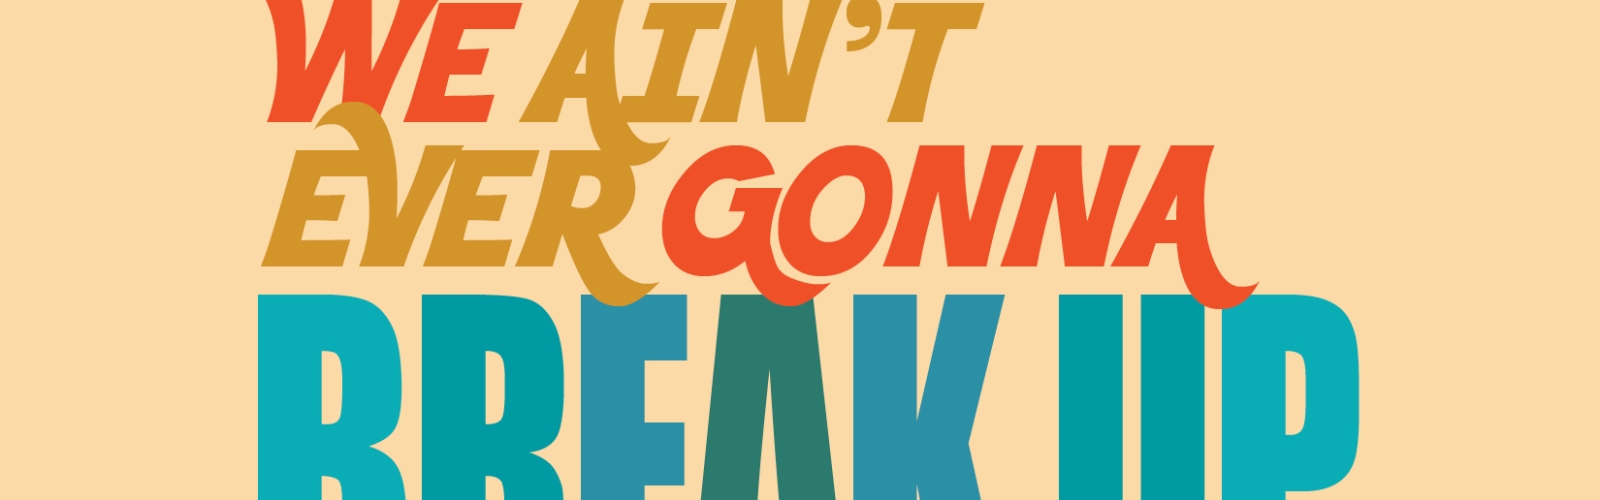 We Aint Ever Gonna Break Up: The Hymon and Parfunkel Musical